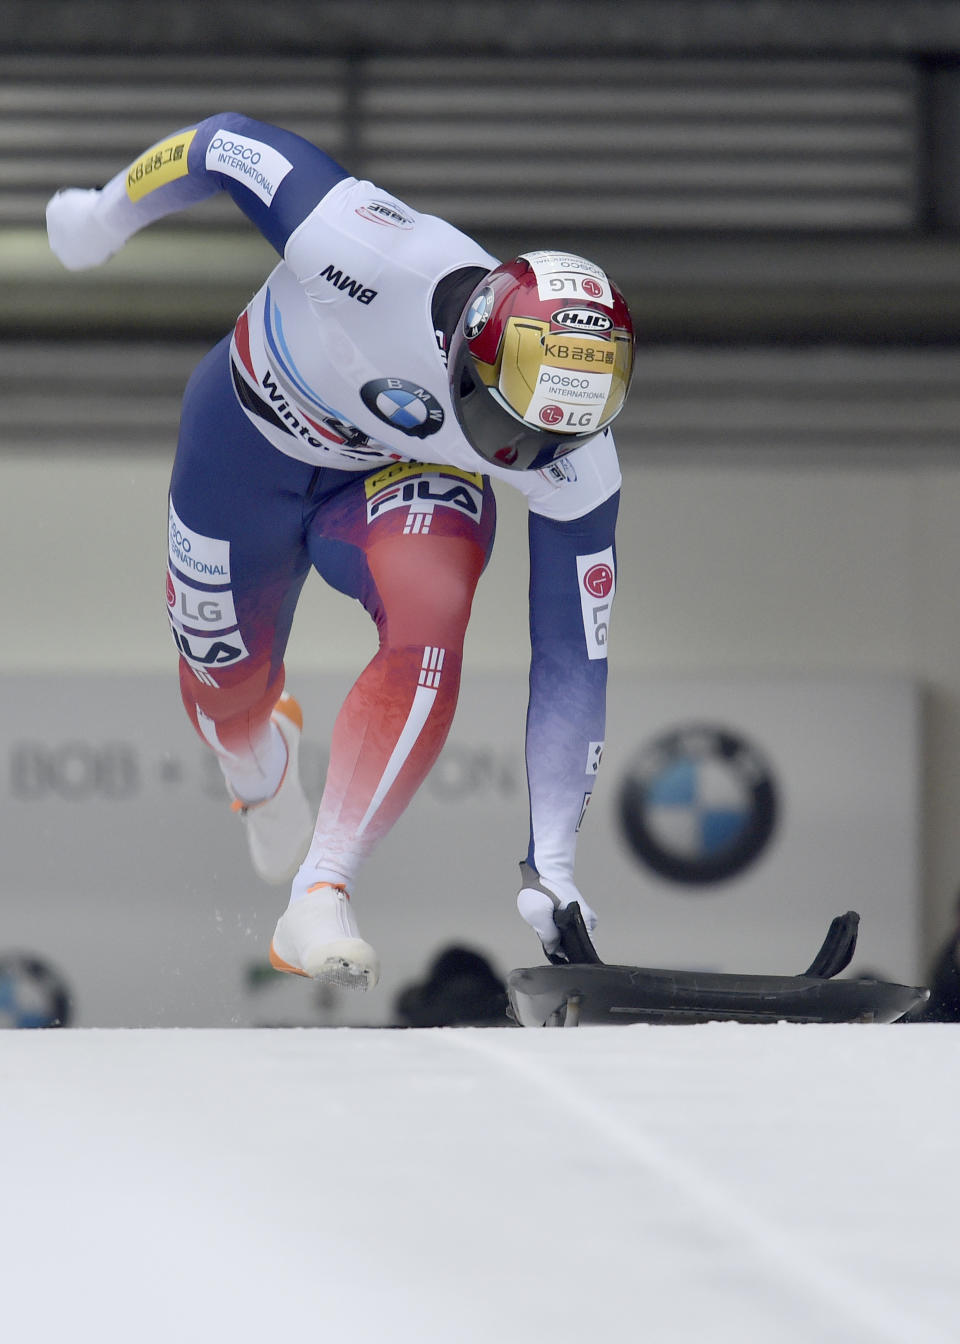 Yun Sung Bin from South Korea at the start of the ice channel in the first run of the men's Skeleton world cup in Winterberg, Germany, Sunday, Jan.5, 2019. (Caroline Seidel/dpa via AP)